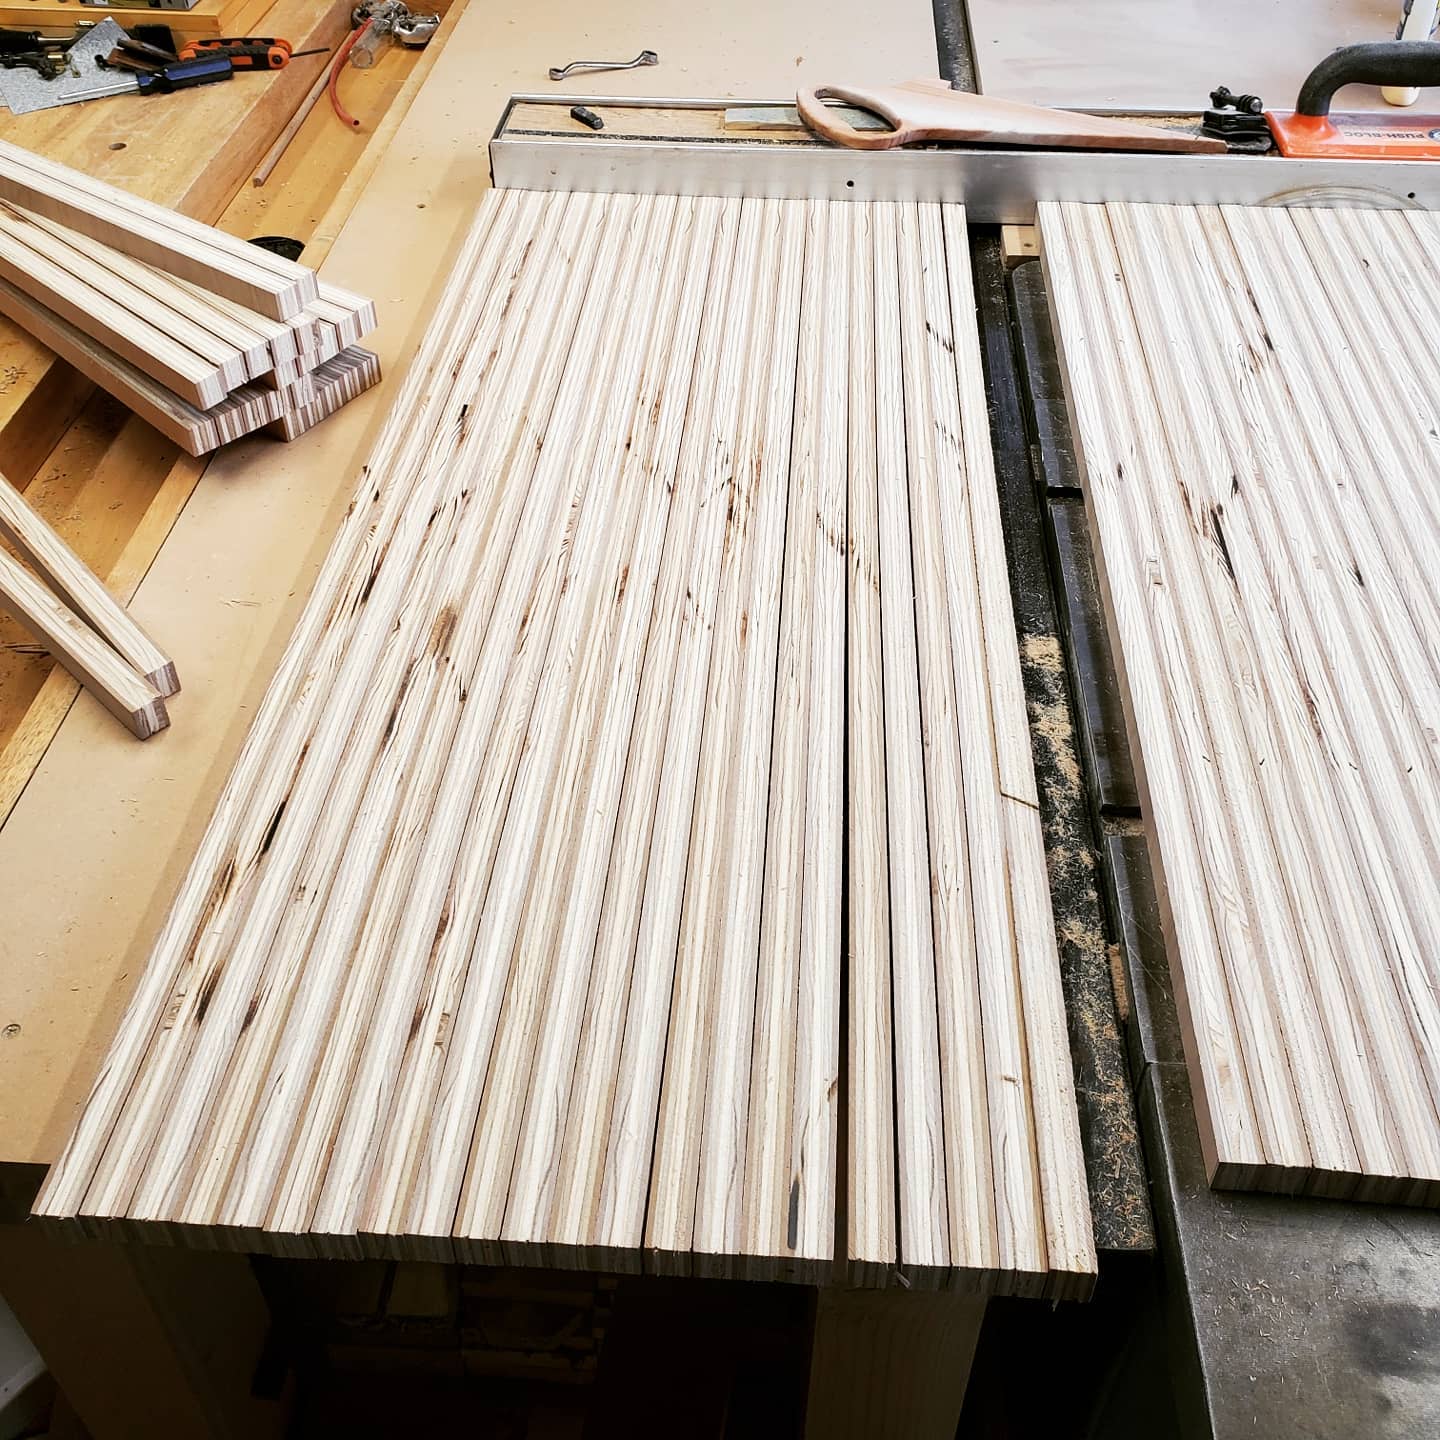 Strips of Cherry plywood lined up on top of a table saw to be glued together.